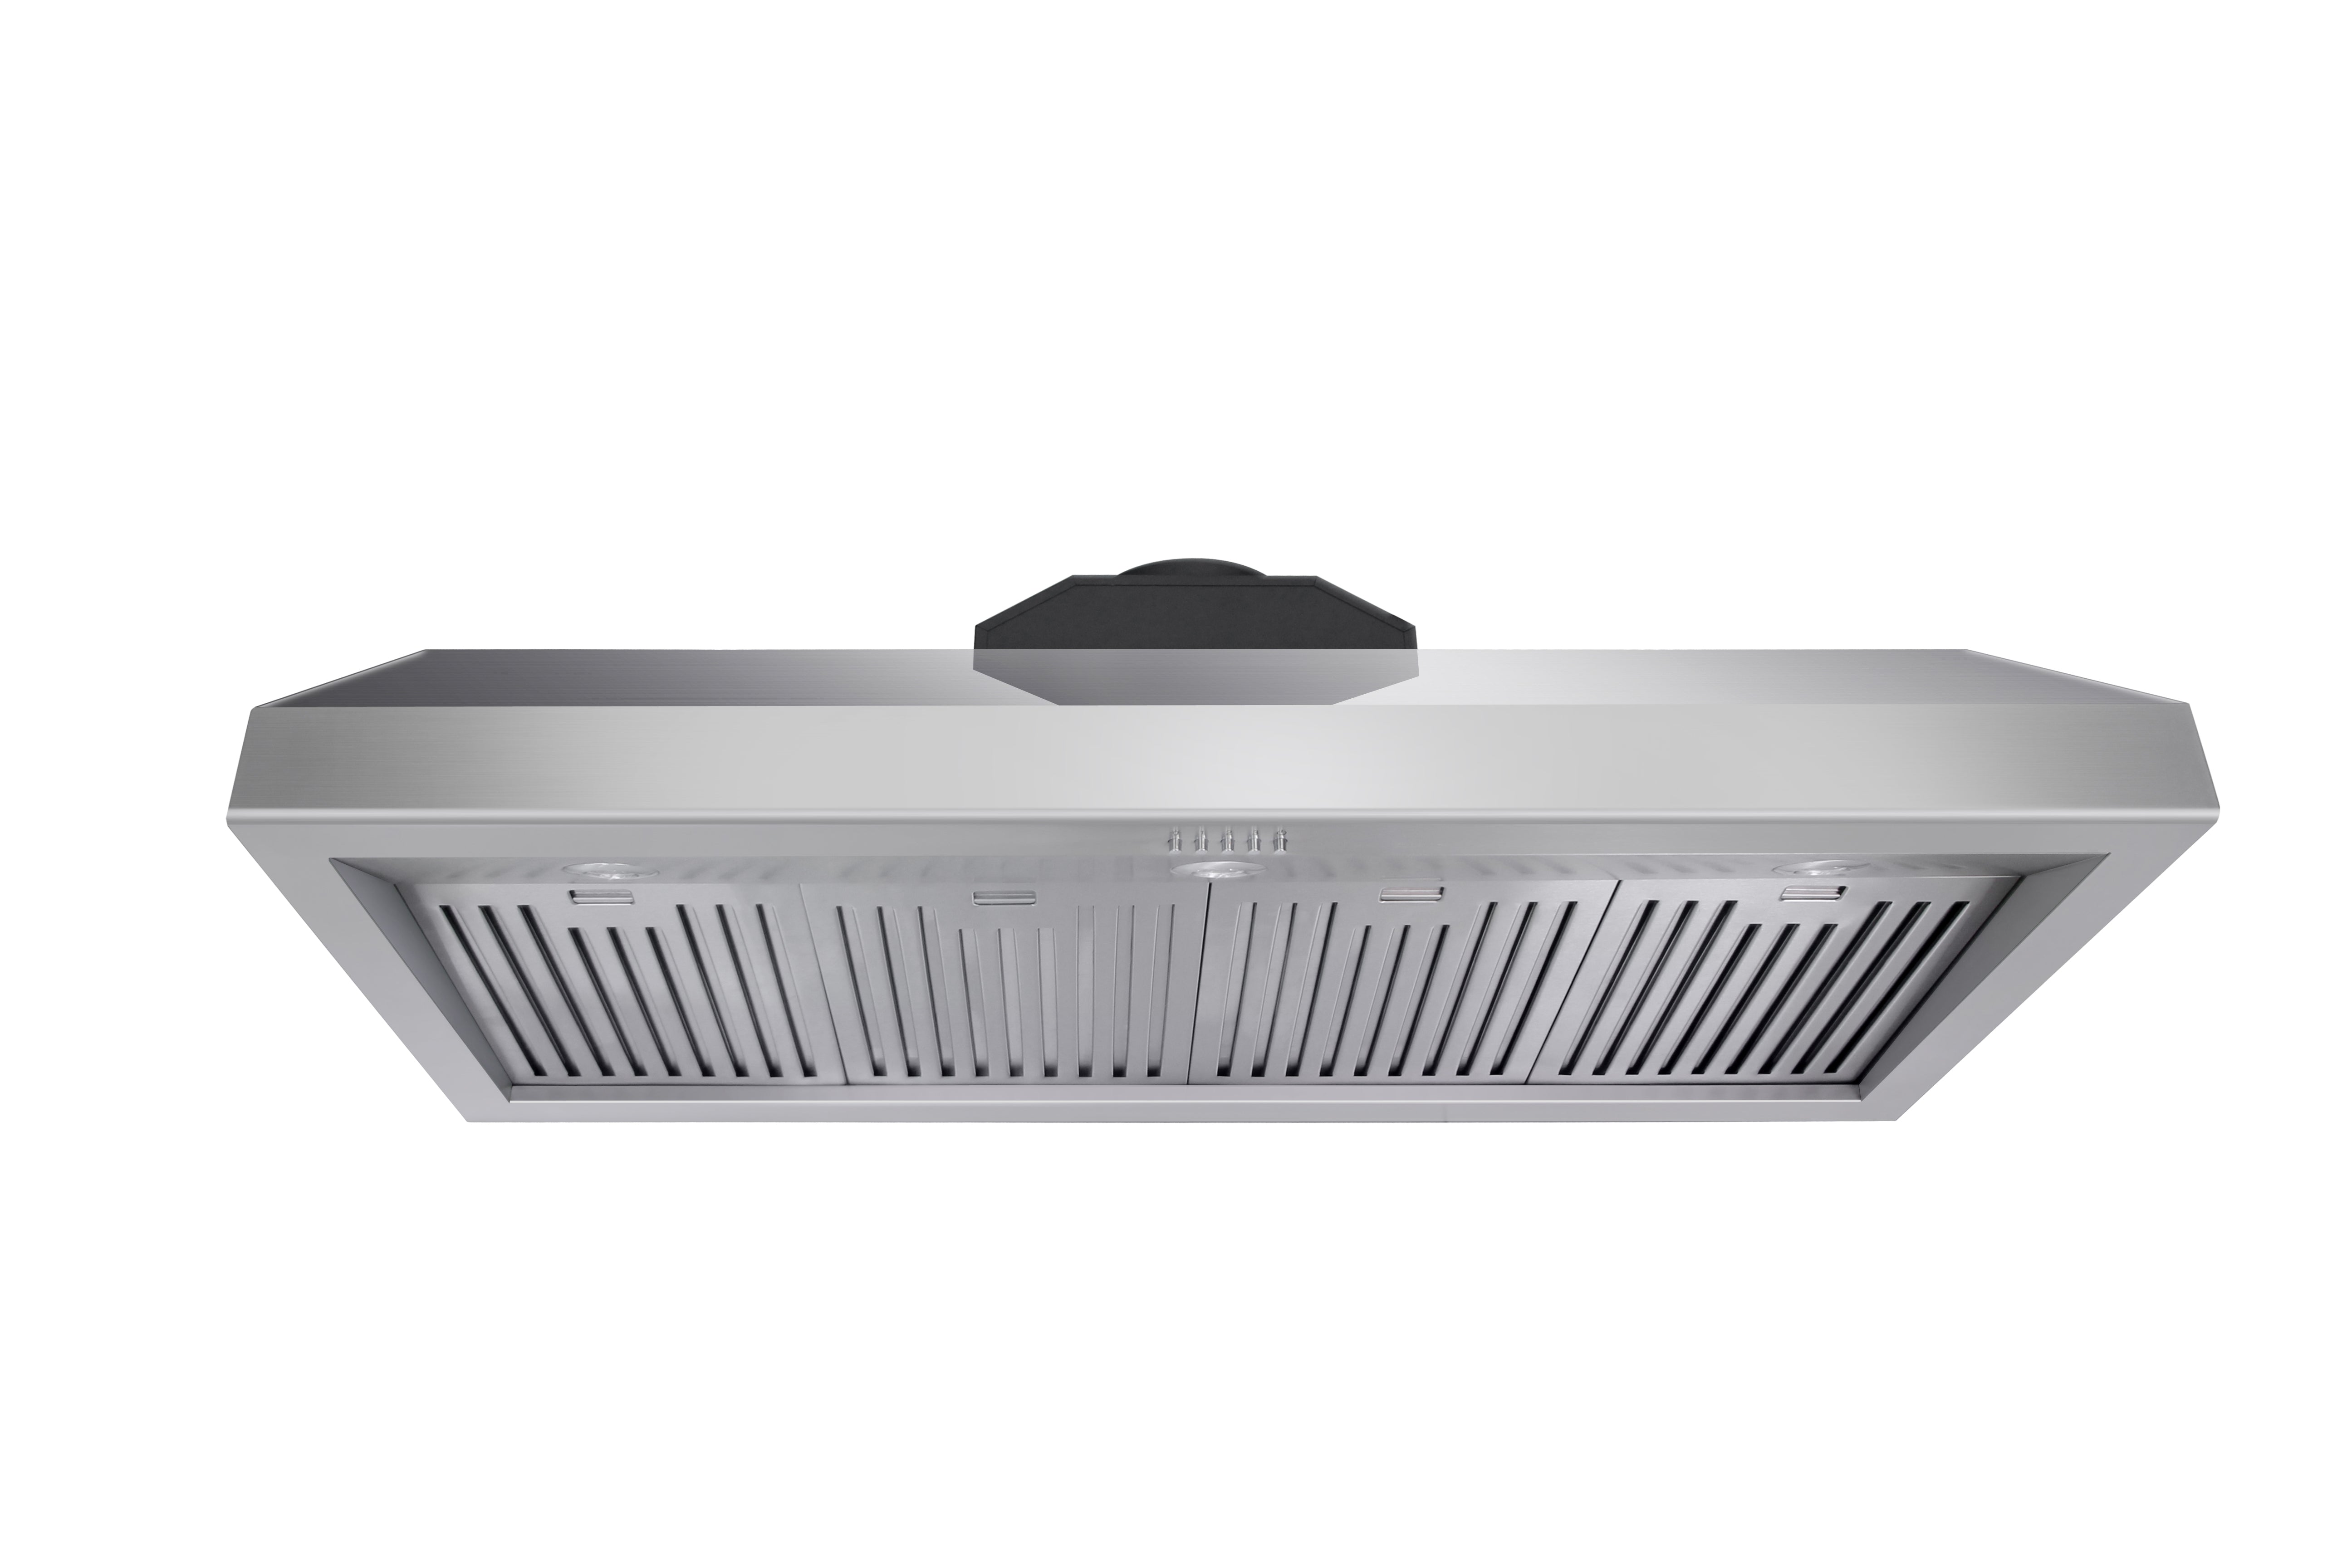 TRH4806-R (Renewed) Thor Kitchen 48 Inch Professional Range Hood, 11 Inches Tall in Stainless Steel